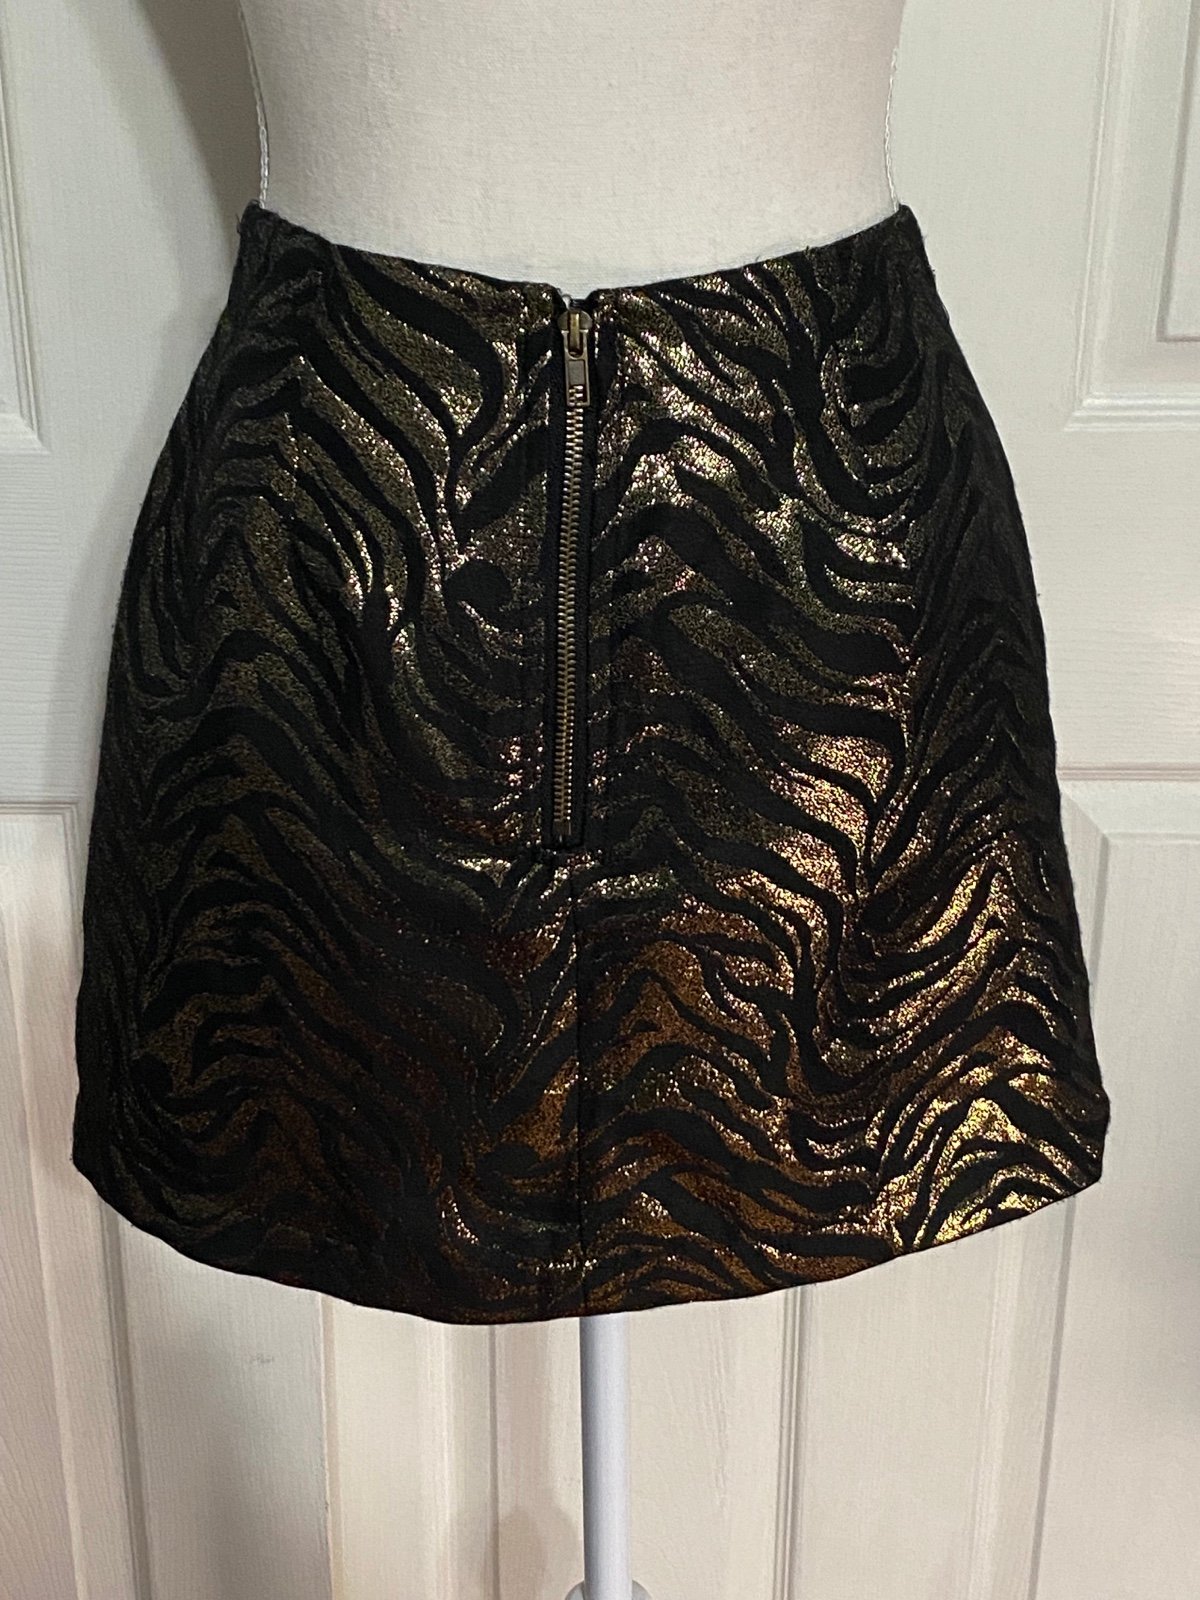 Comfortable MinkPink Friday Forever Black with Gold Animal Print Skirt Size XS FHcrqNFdY Novel 